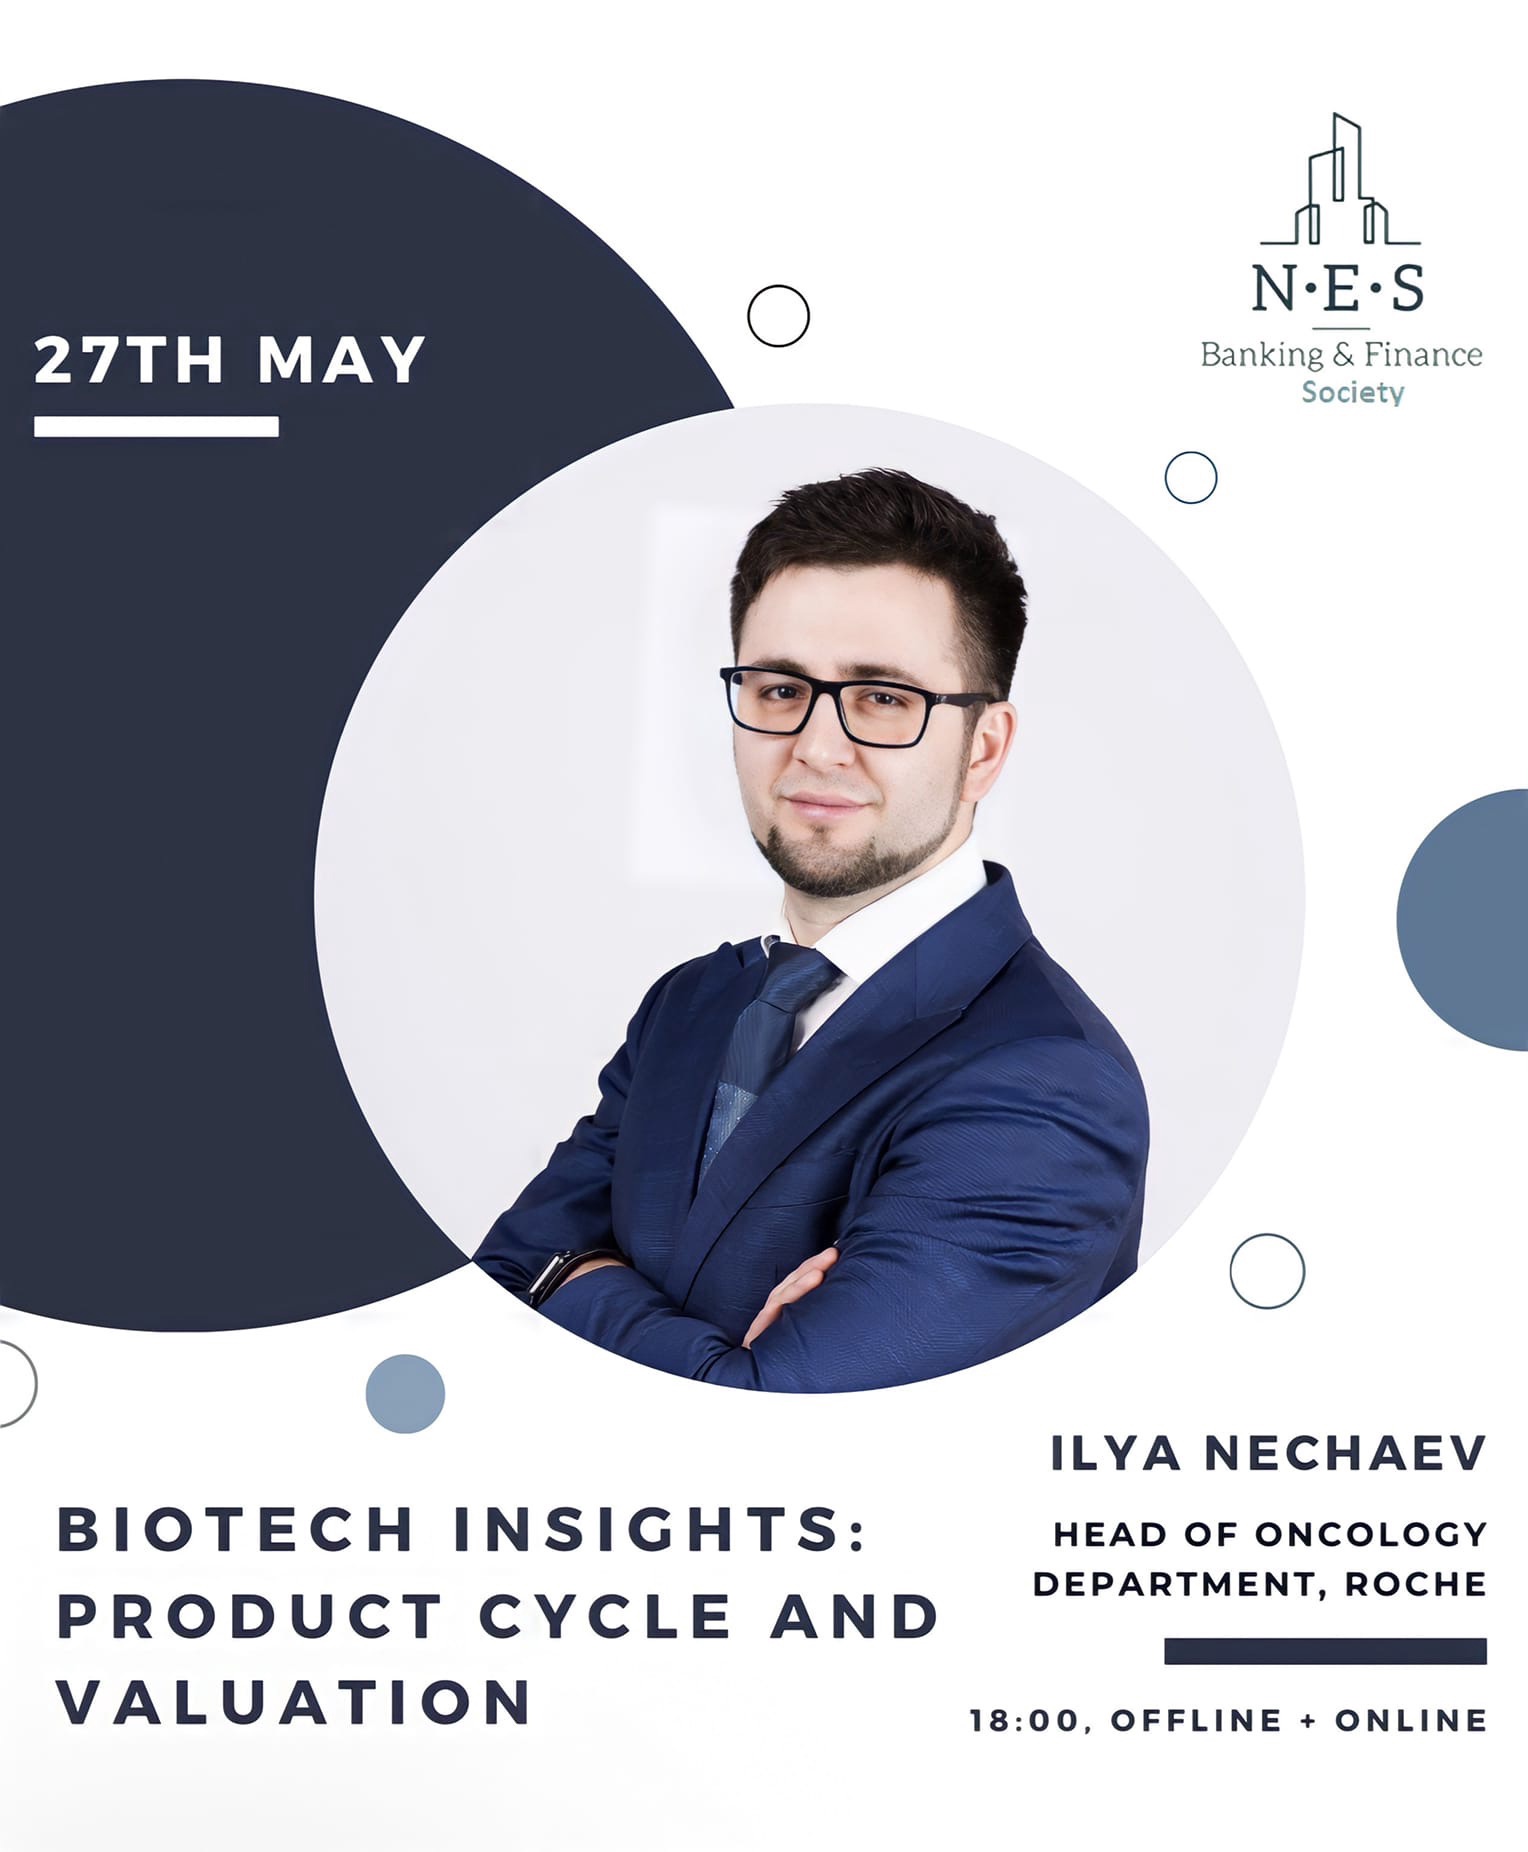 Ilya Nechayev – the head of Oncology Department at Roche and the specialist in the field of BioMedtech startups